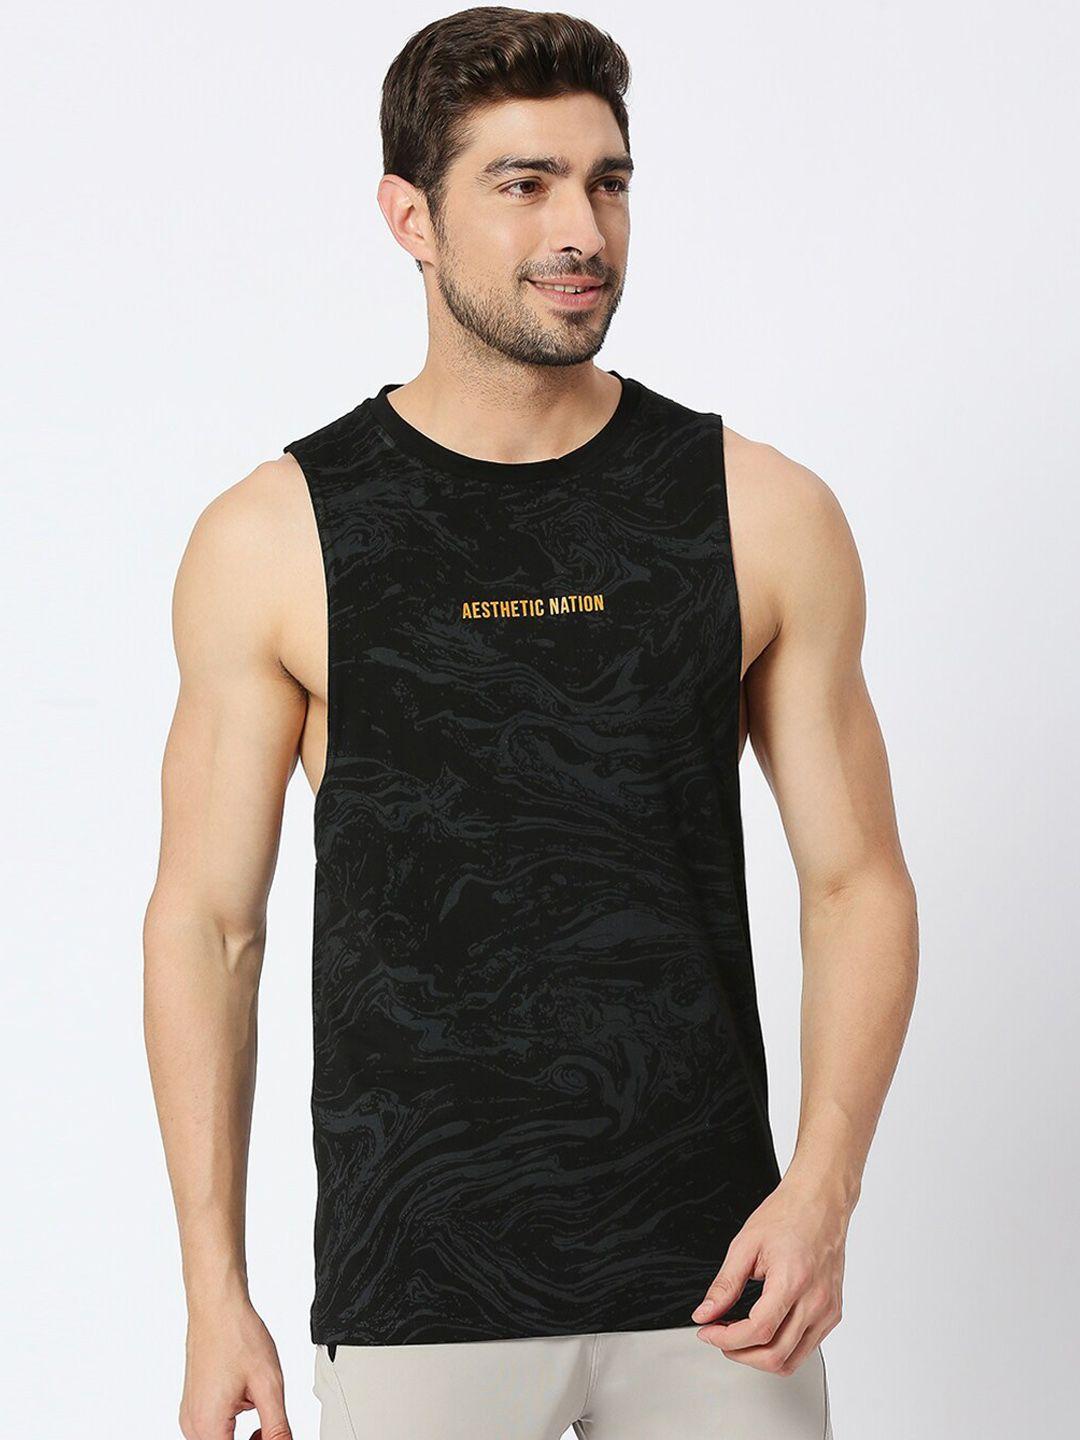 aesthetic nation abstract printed unparalled comfort cotton sports innerwear vests